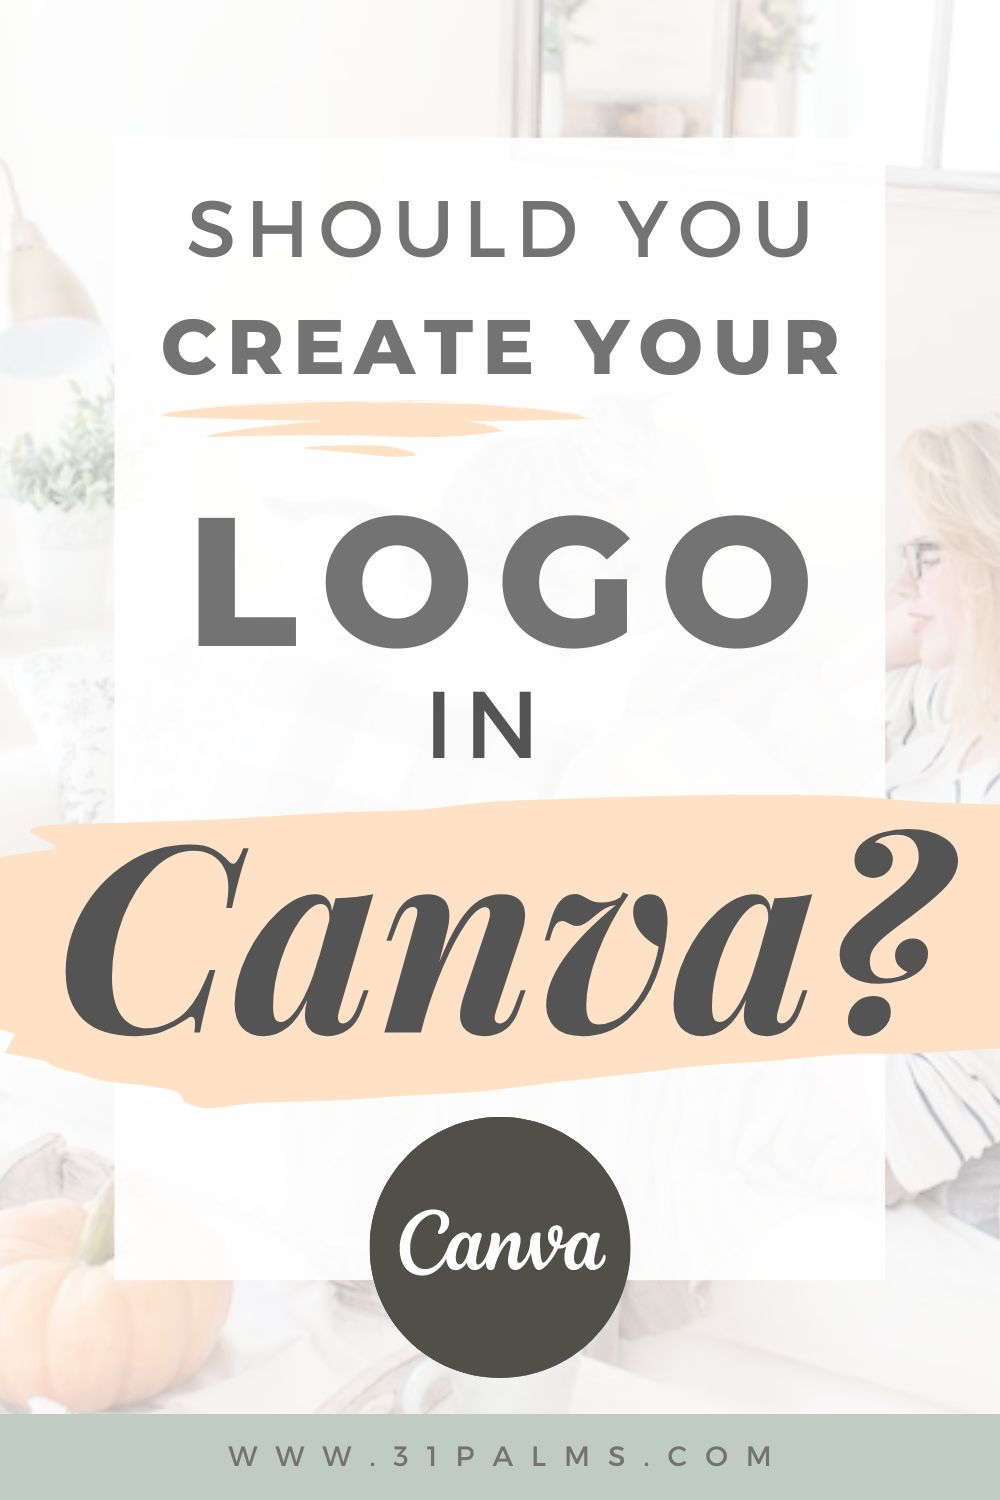 should you create your logo in canva?